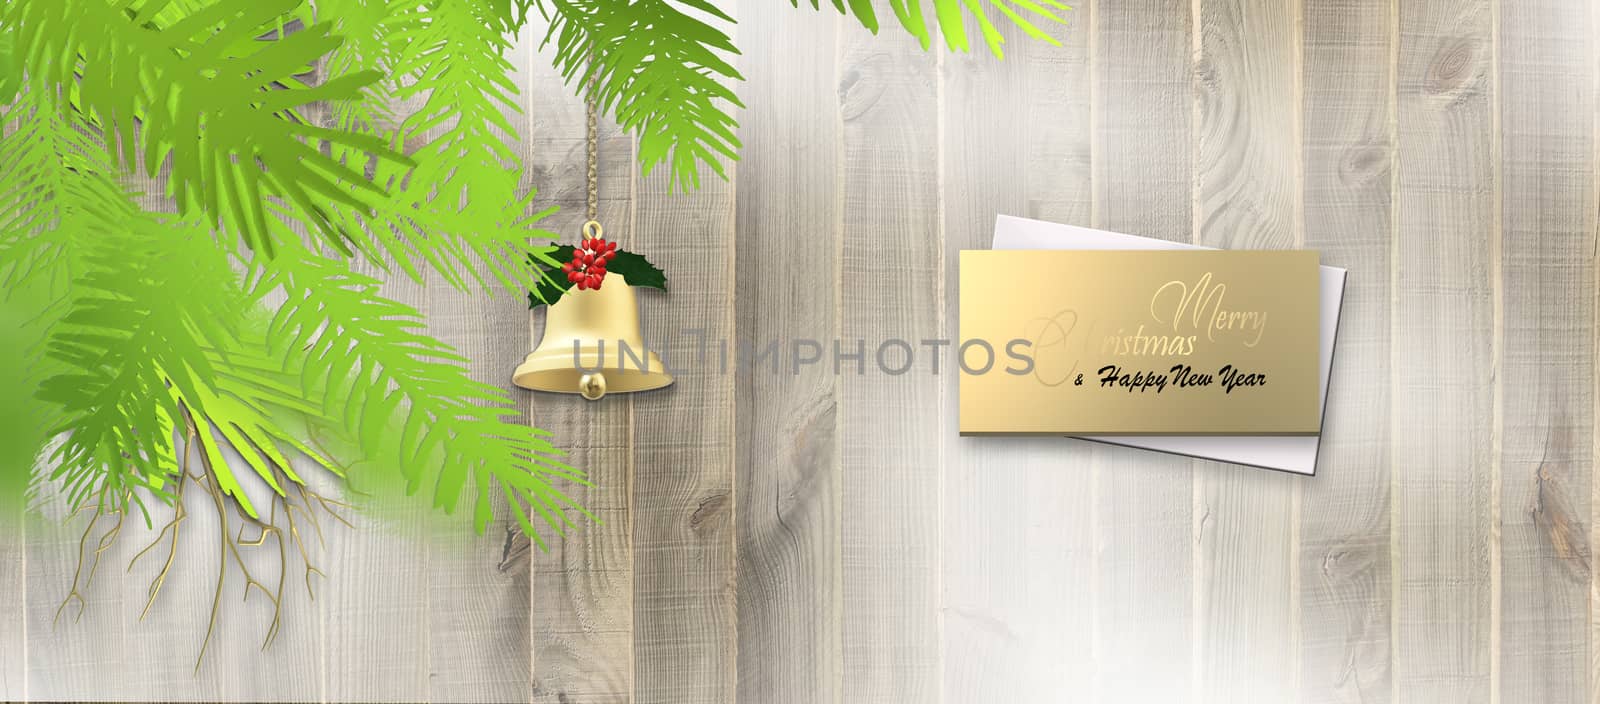 Christmas wooden background by NelliPolk